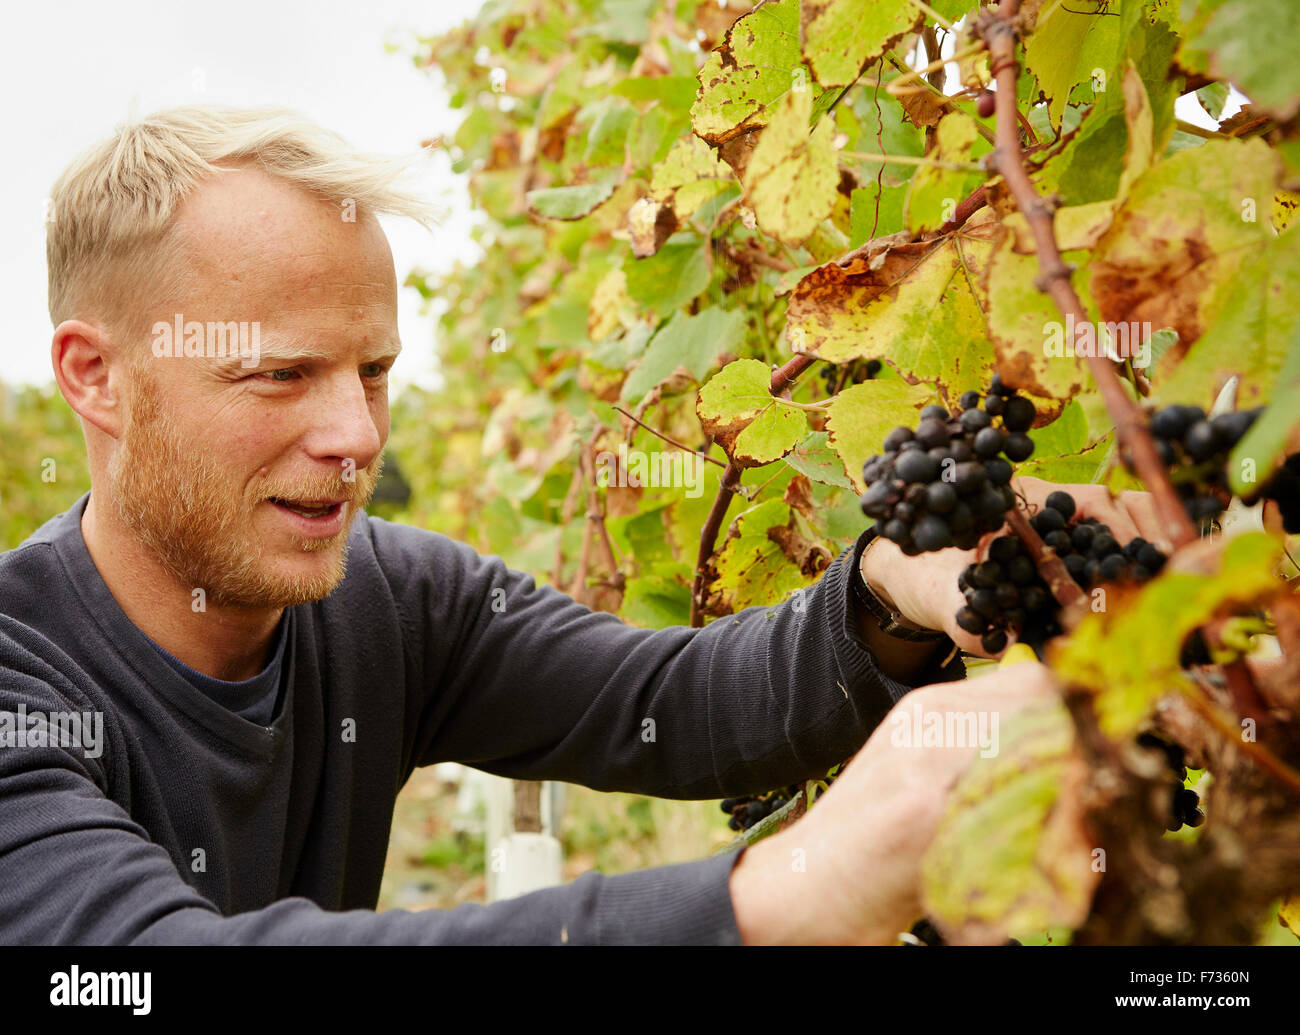 A grape picker at work selecting bunches of grapes on the vine. Stock Photo